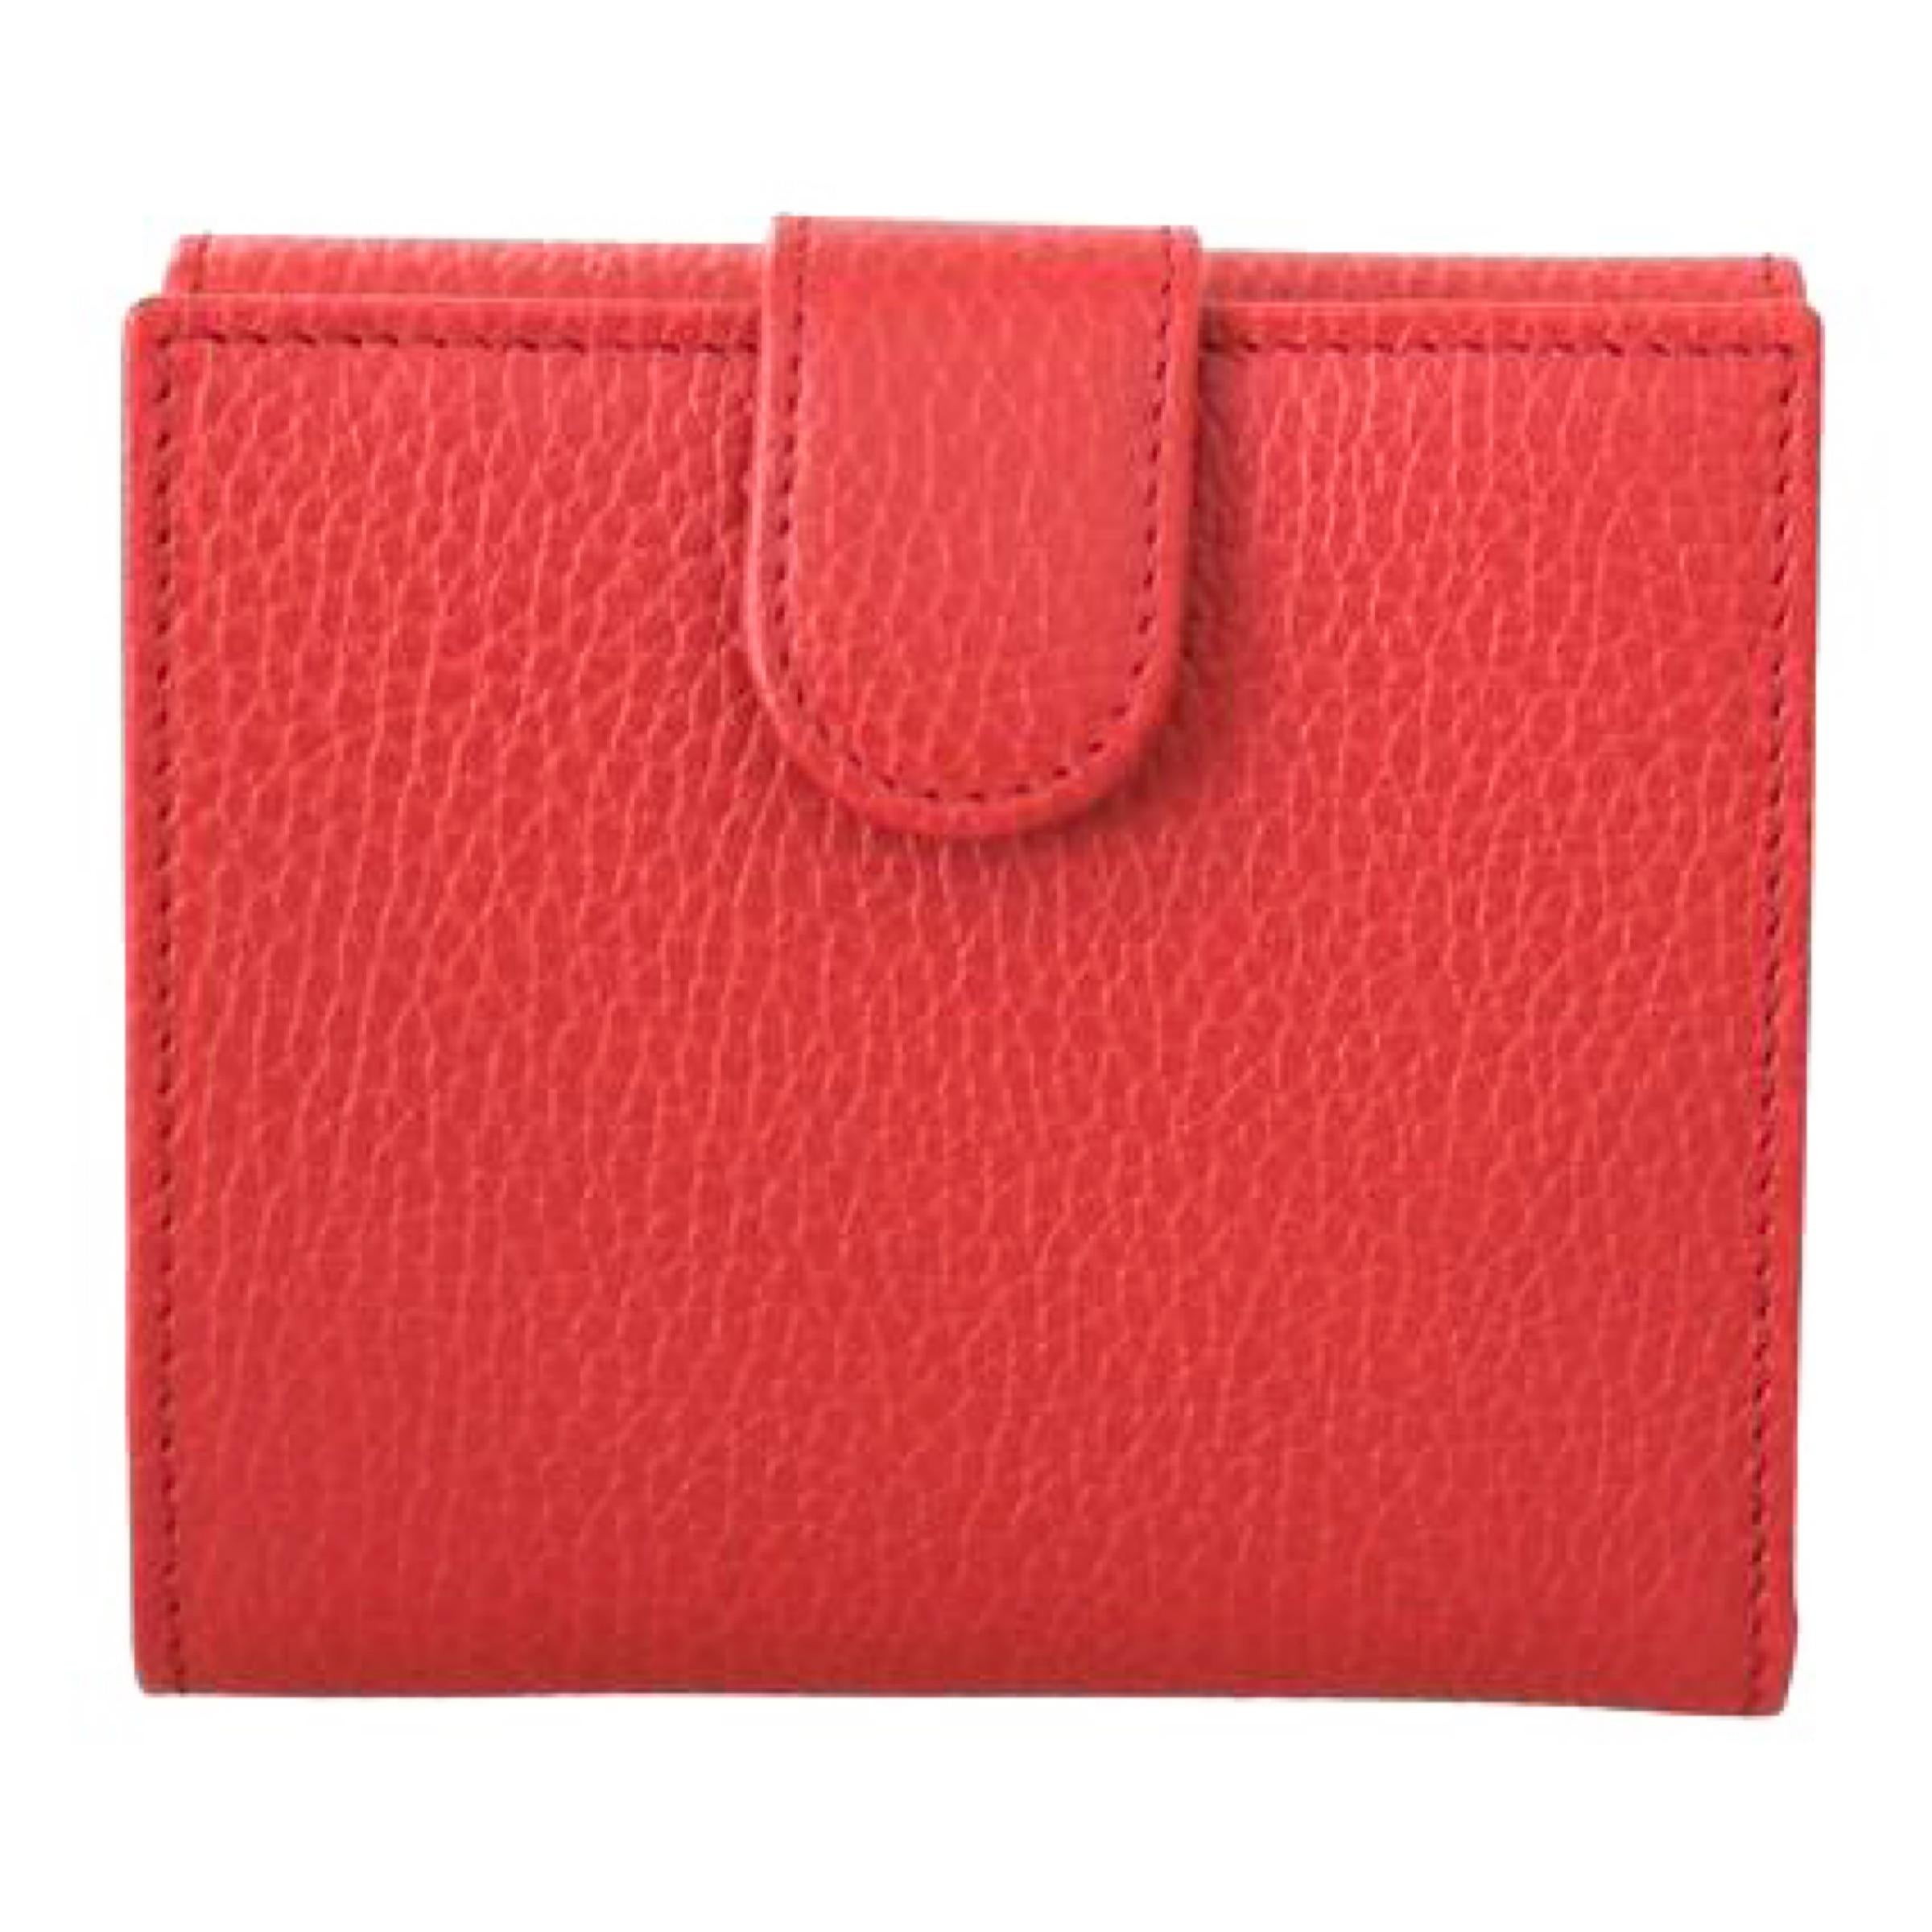 Women's or Men's NEW Gucci Red Interlocking G Leather Bifold Wallet Card Case For Sale